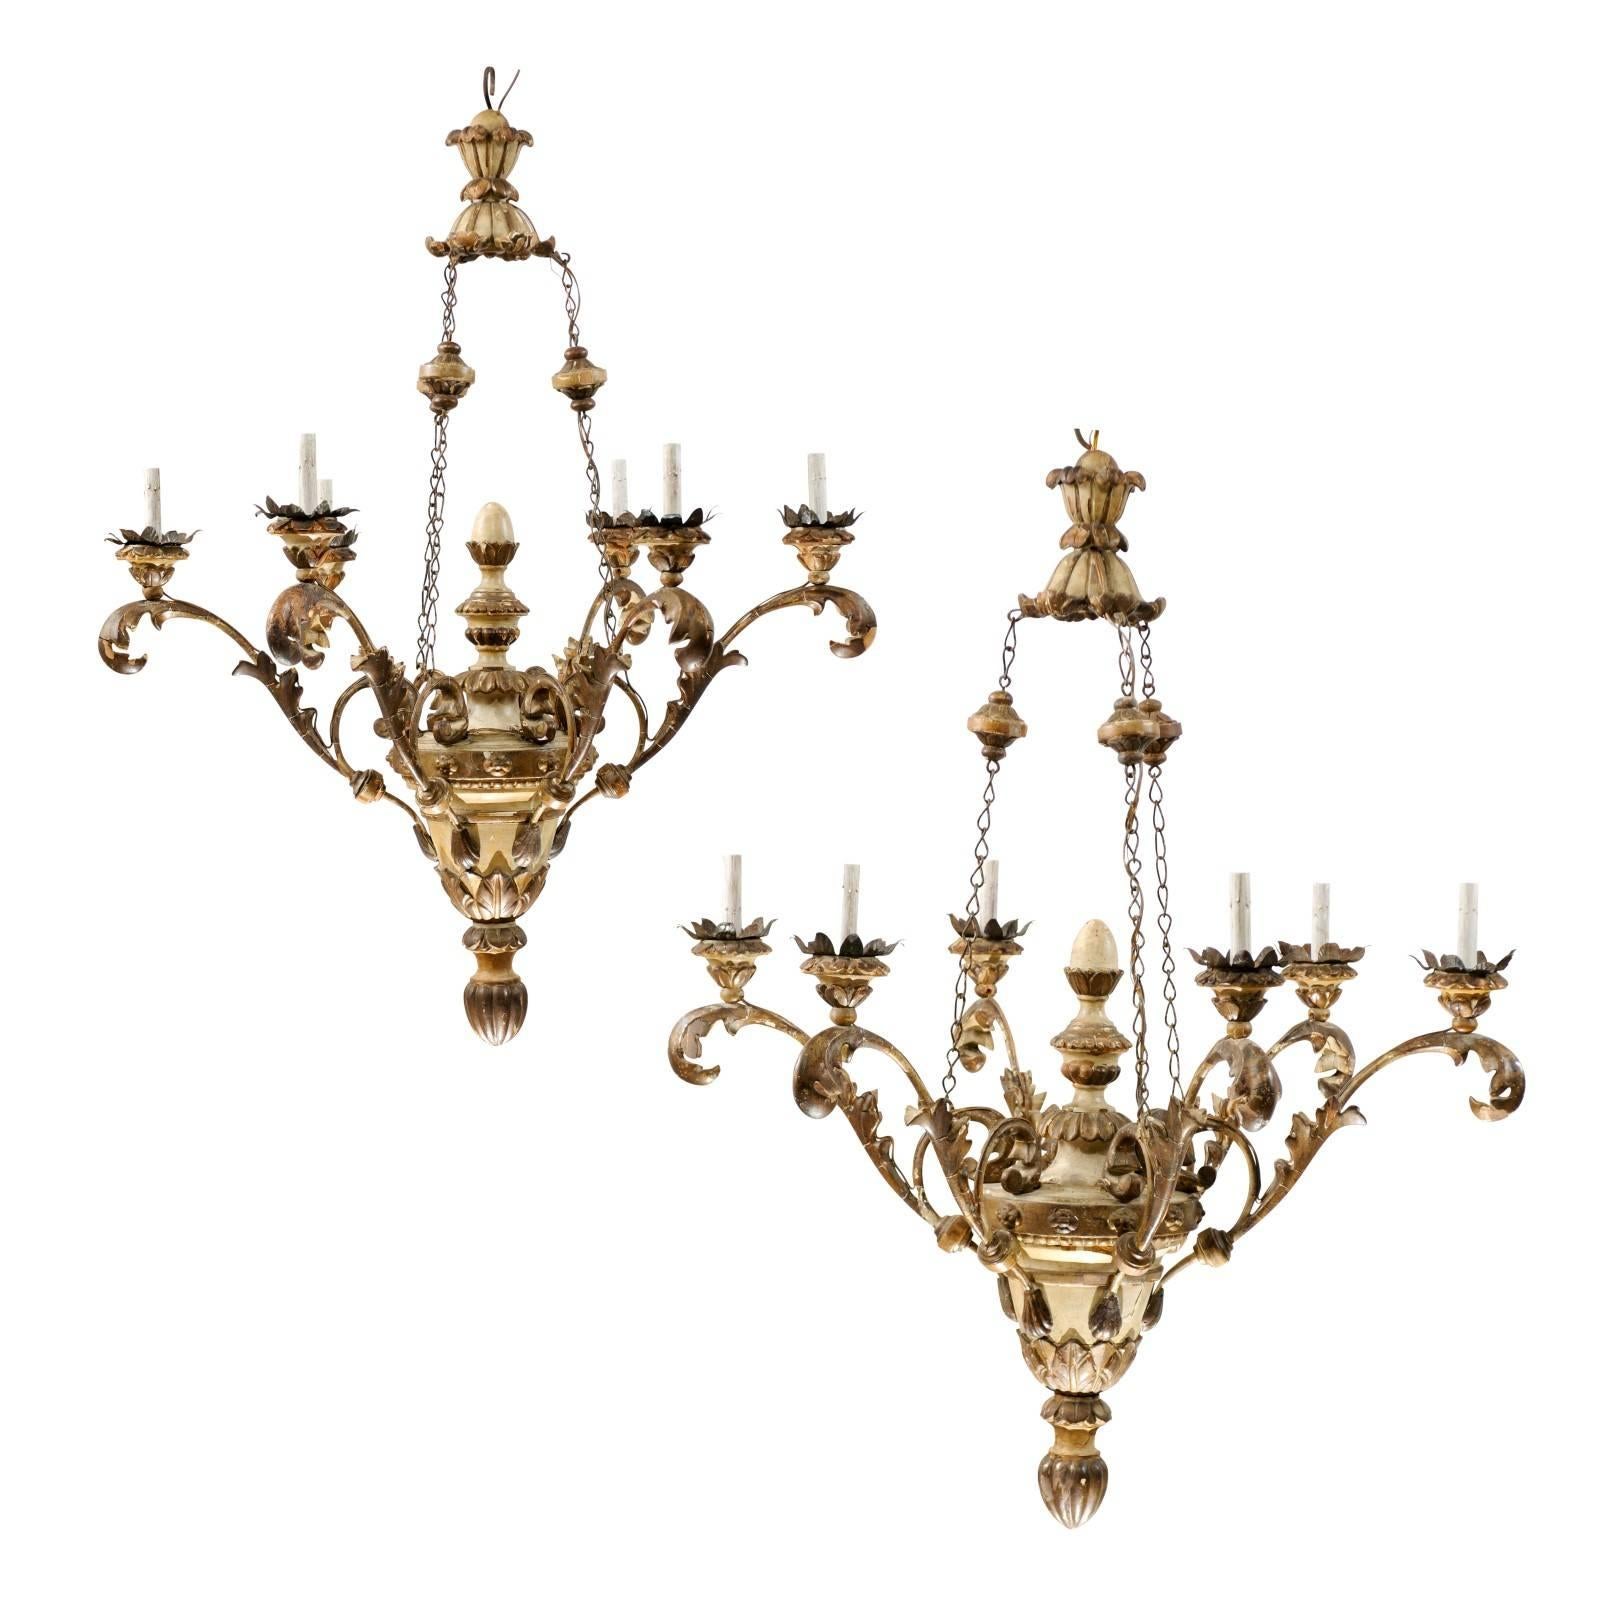 An Exquisite Pair of Italian Early 20th C. Carved & Painted Wood Chandeliers